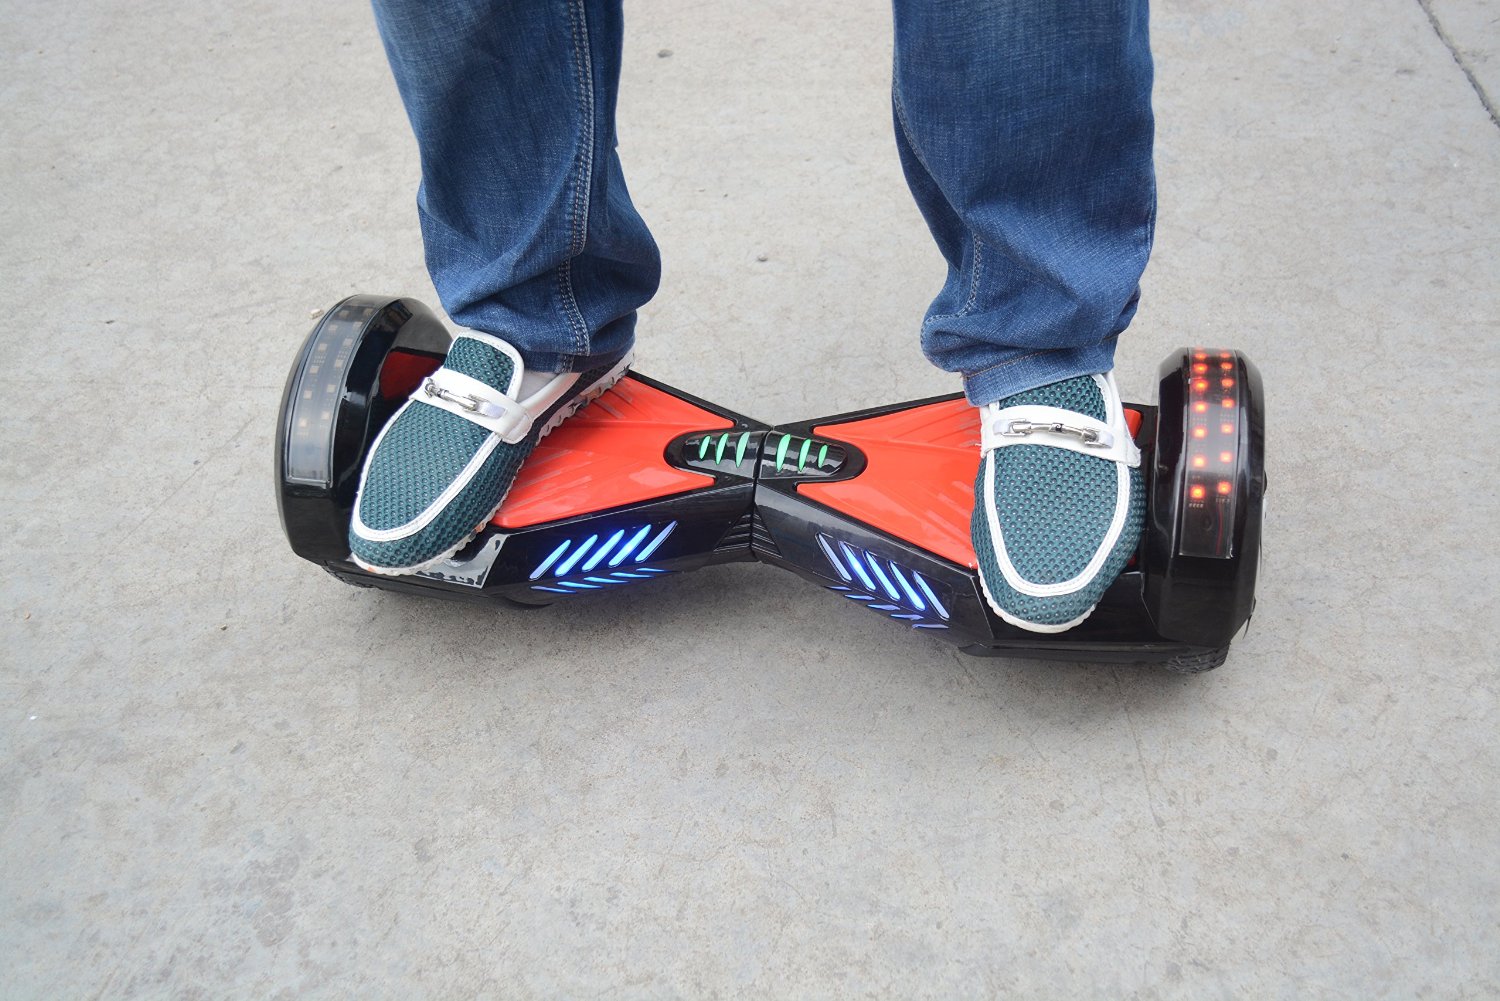 Best hoverboard for kids review 2018 – Safety is our #1 concern